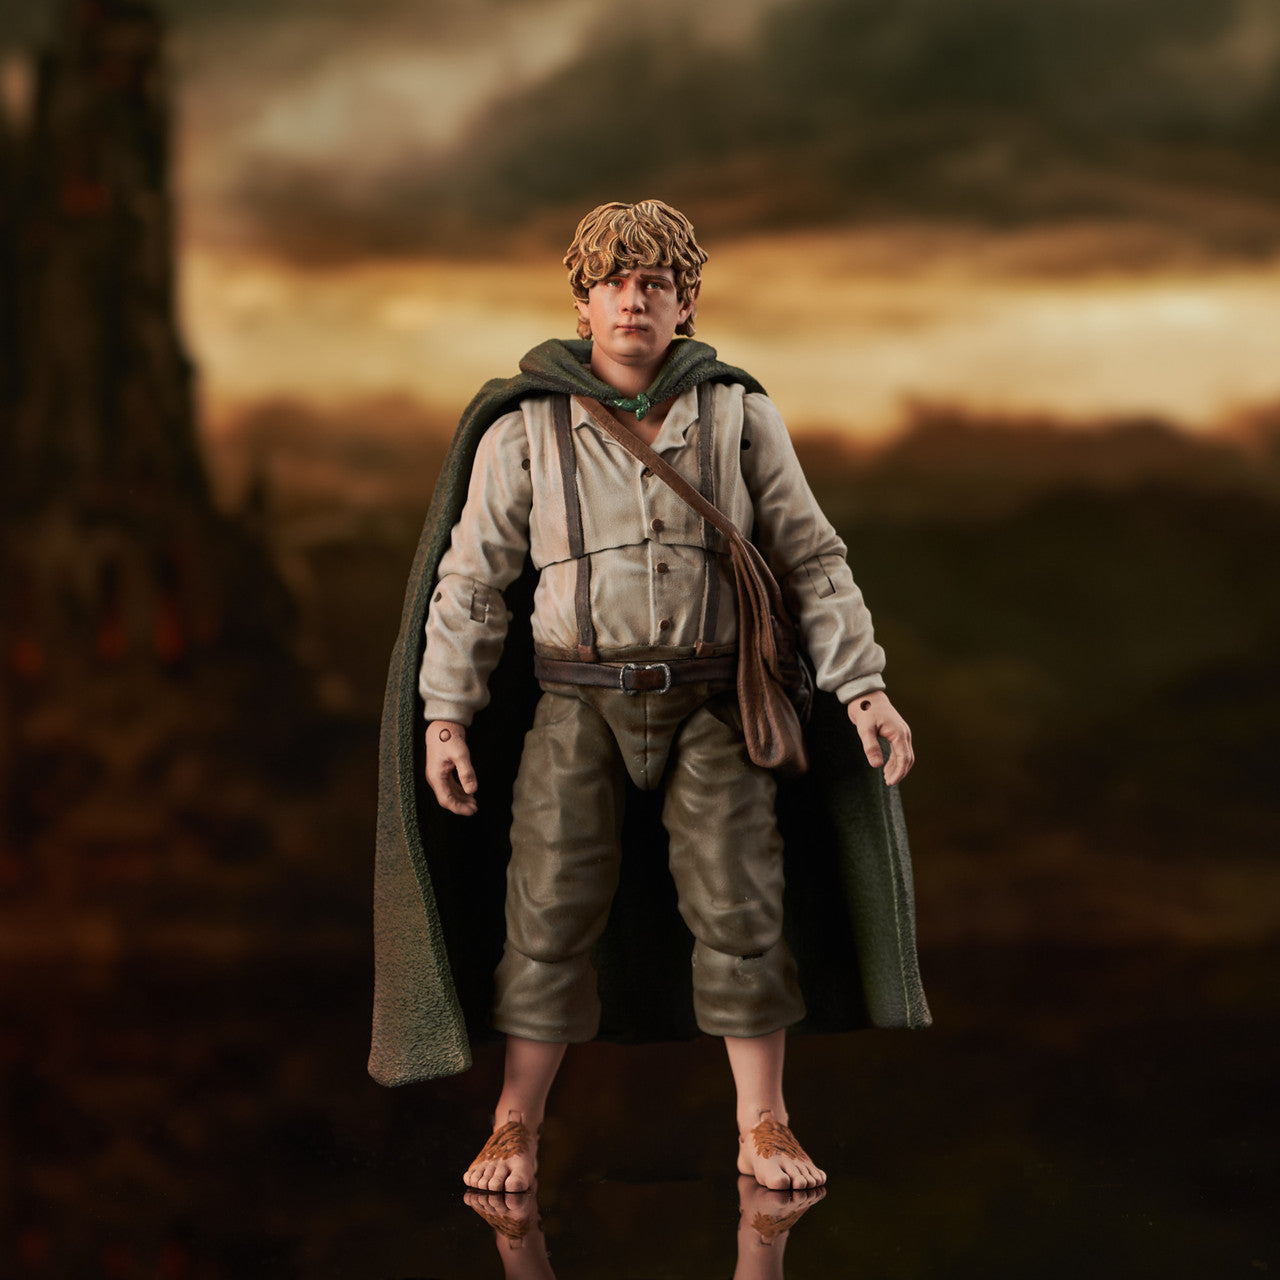 Samwise Gamegee (Series 6) Deluxe Lord of the Rings Action Figure